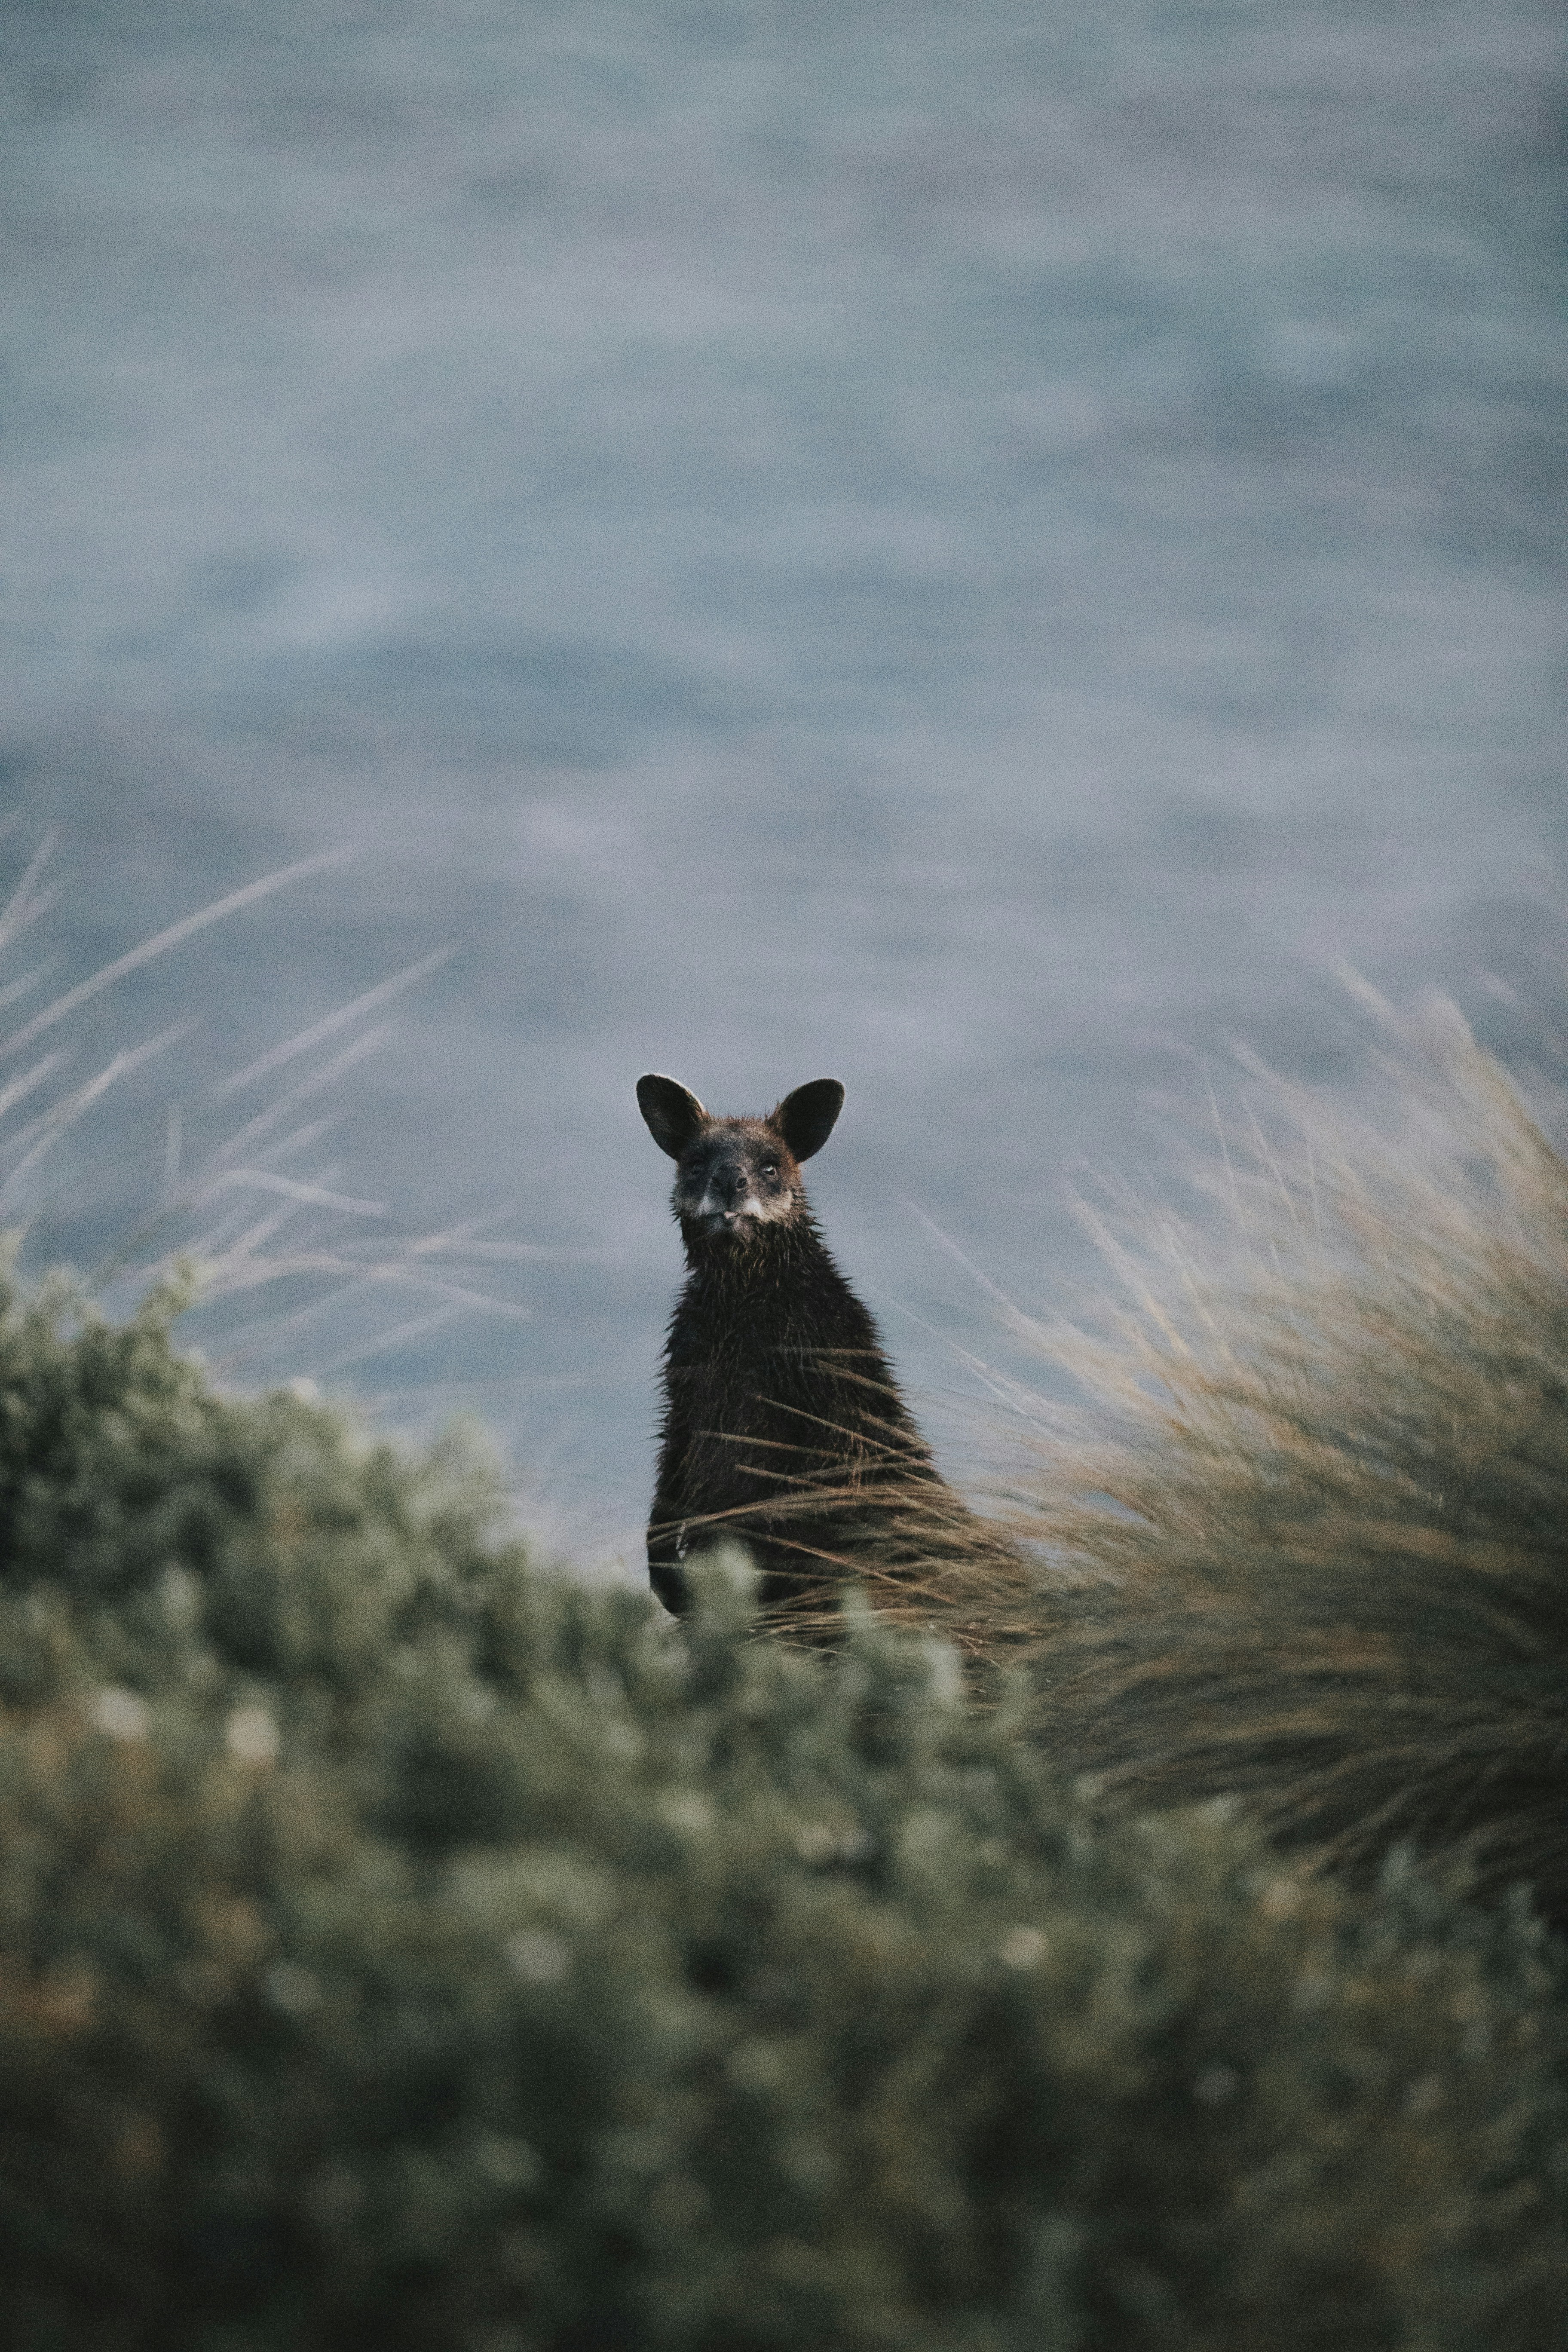 Morning stroll through Phillip Island, Australia I came across the young Kangaroo after a quick dip into the ocean